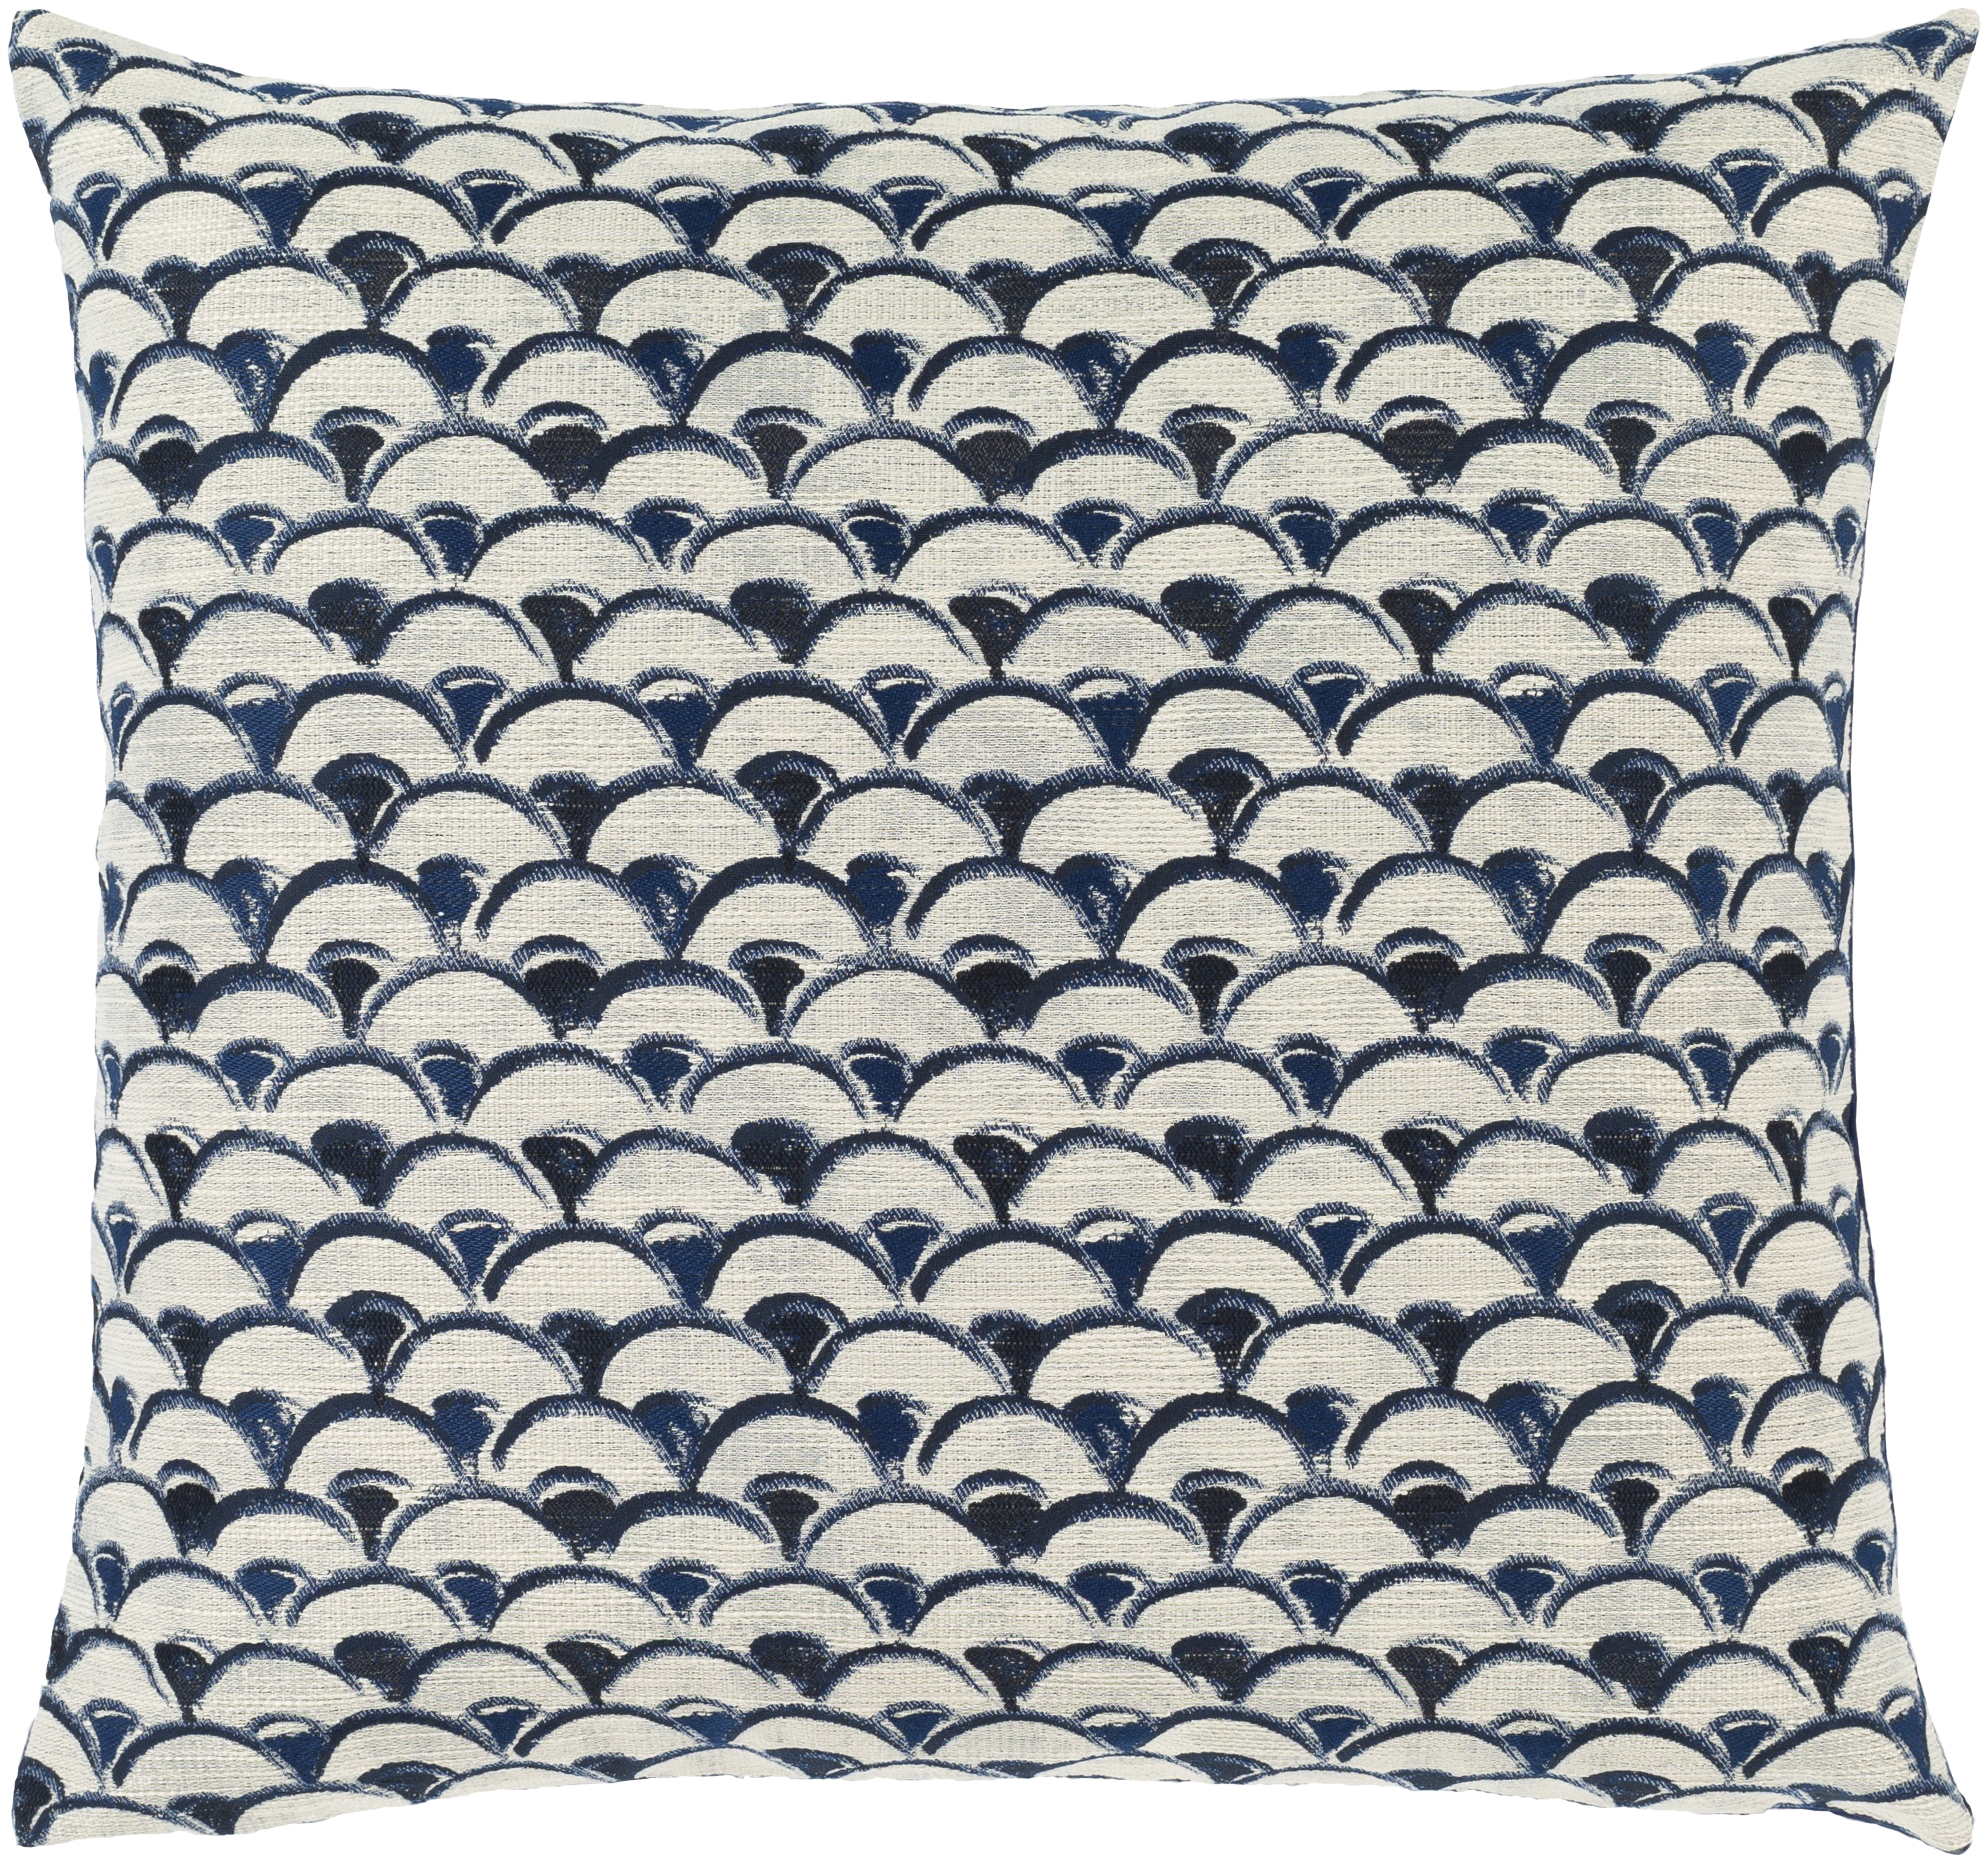 Sanya Bay Throw Pillow, 20" x 20", with poly insert - Image 0